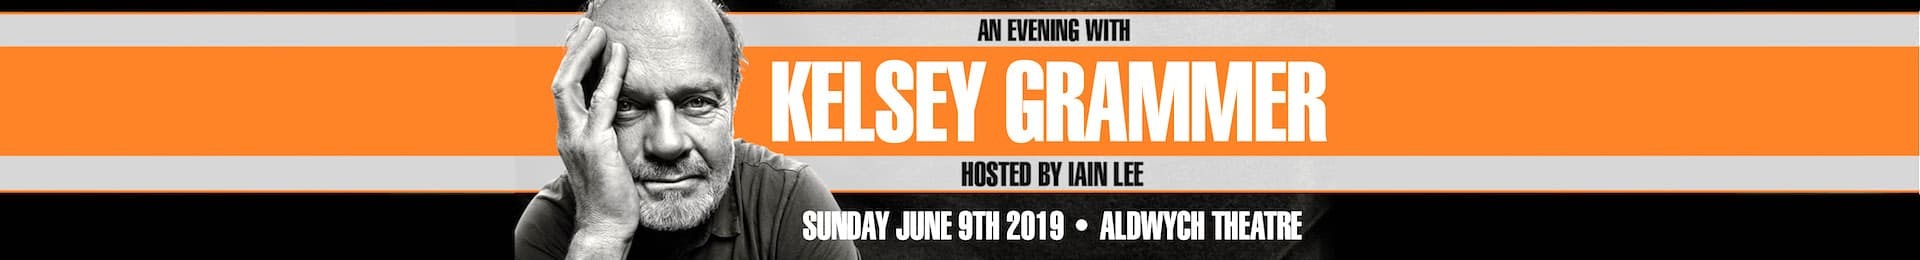 An Evening with Kelsey Grammar banner image